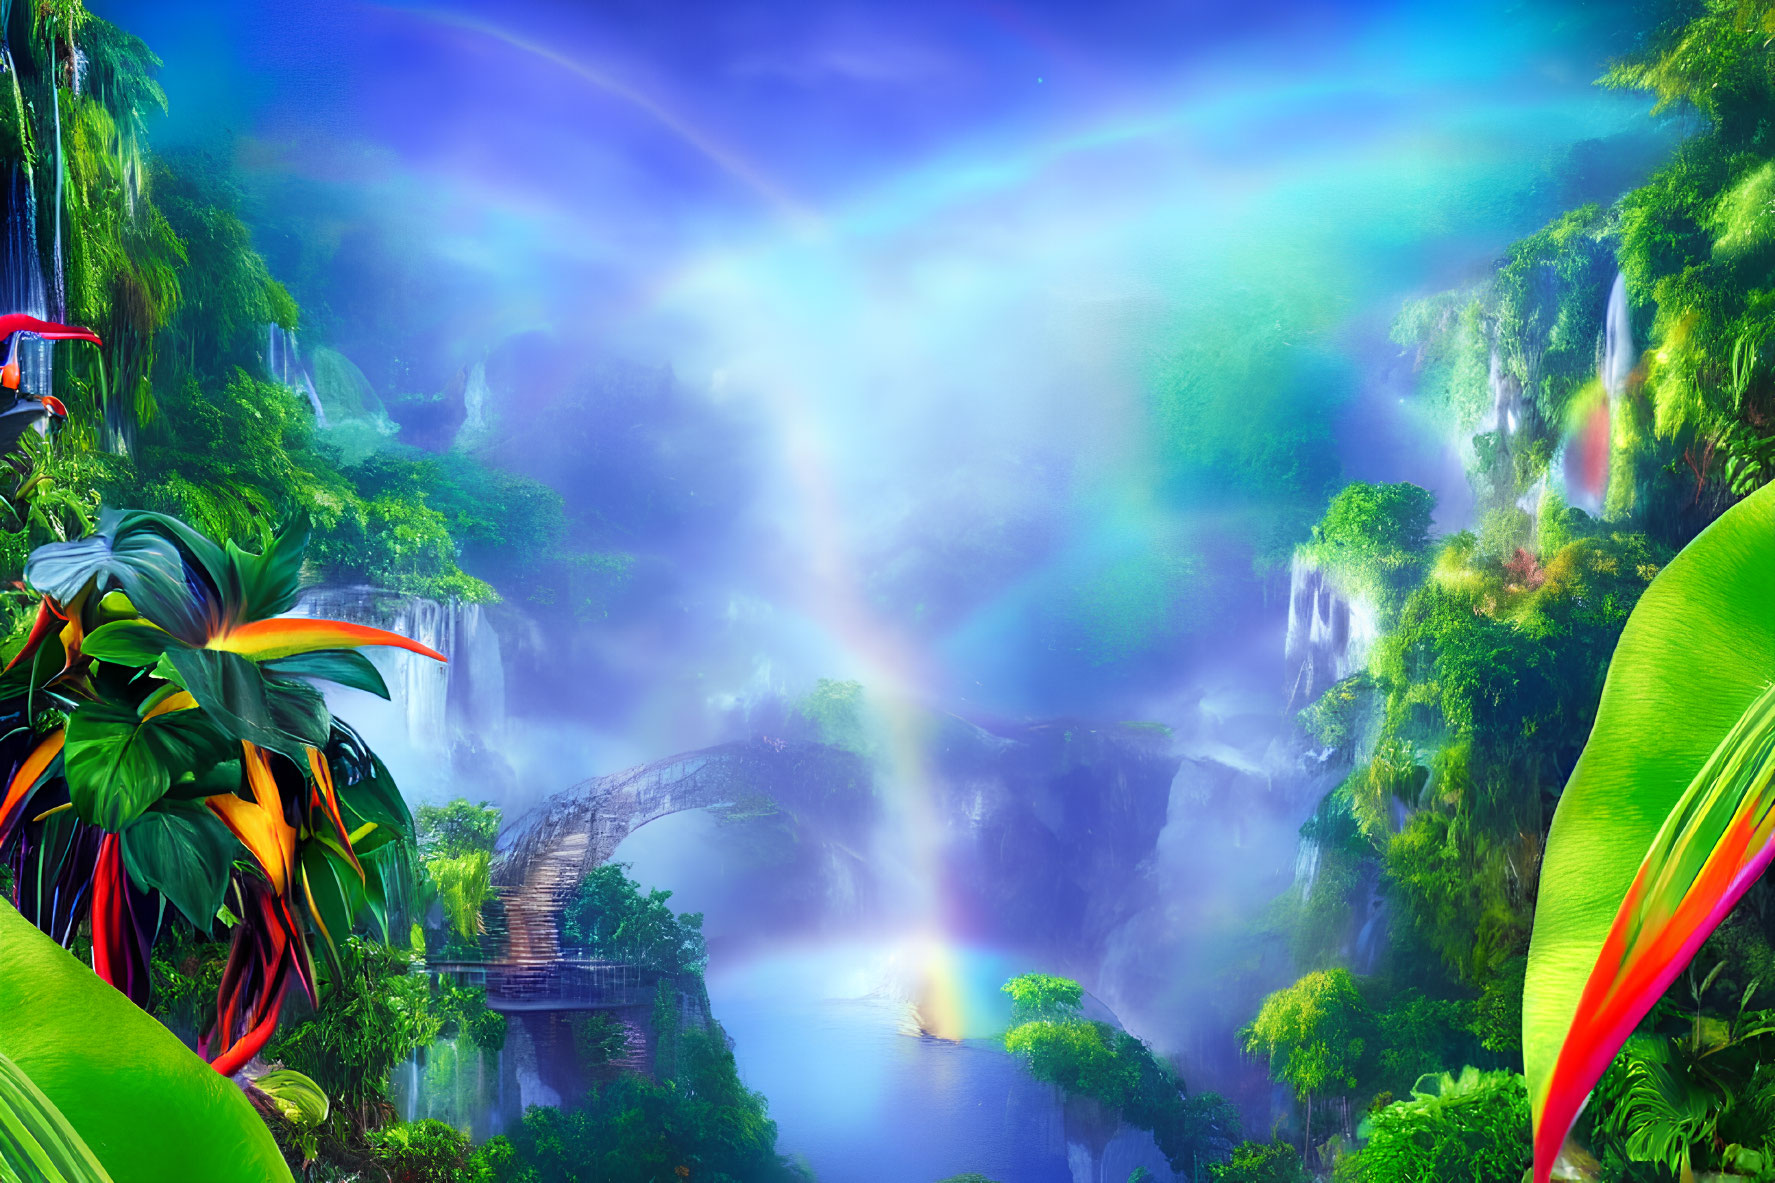 Fantastical landscape with wooden bridge, misty river, lush foliage, waterfalls, and colorful